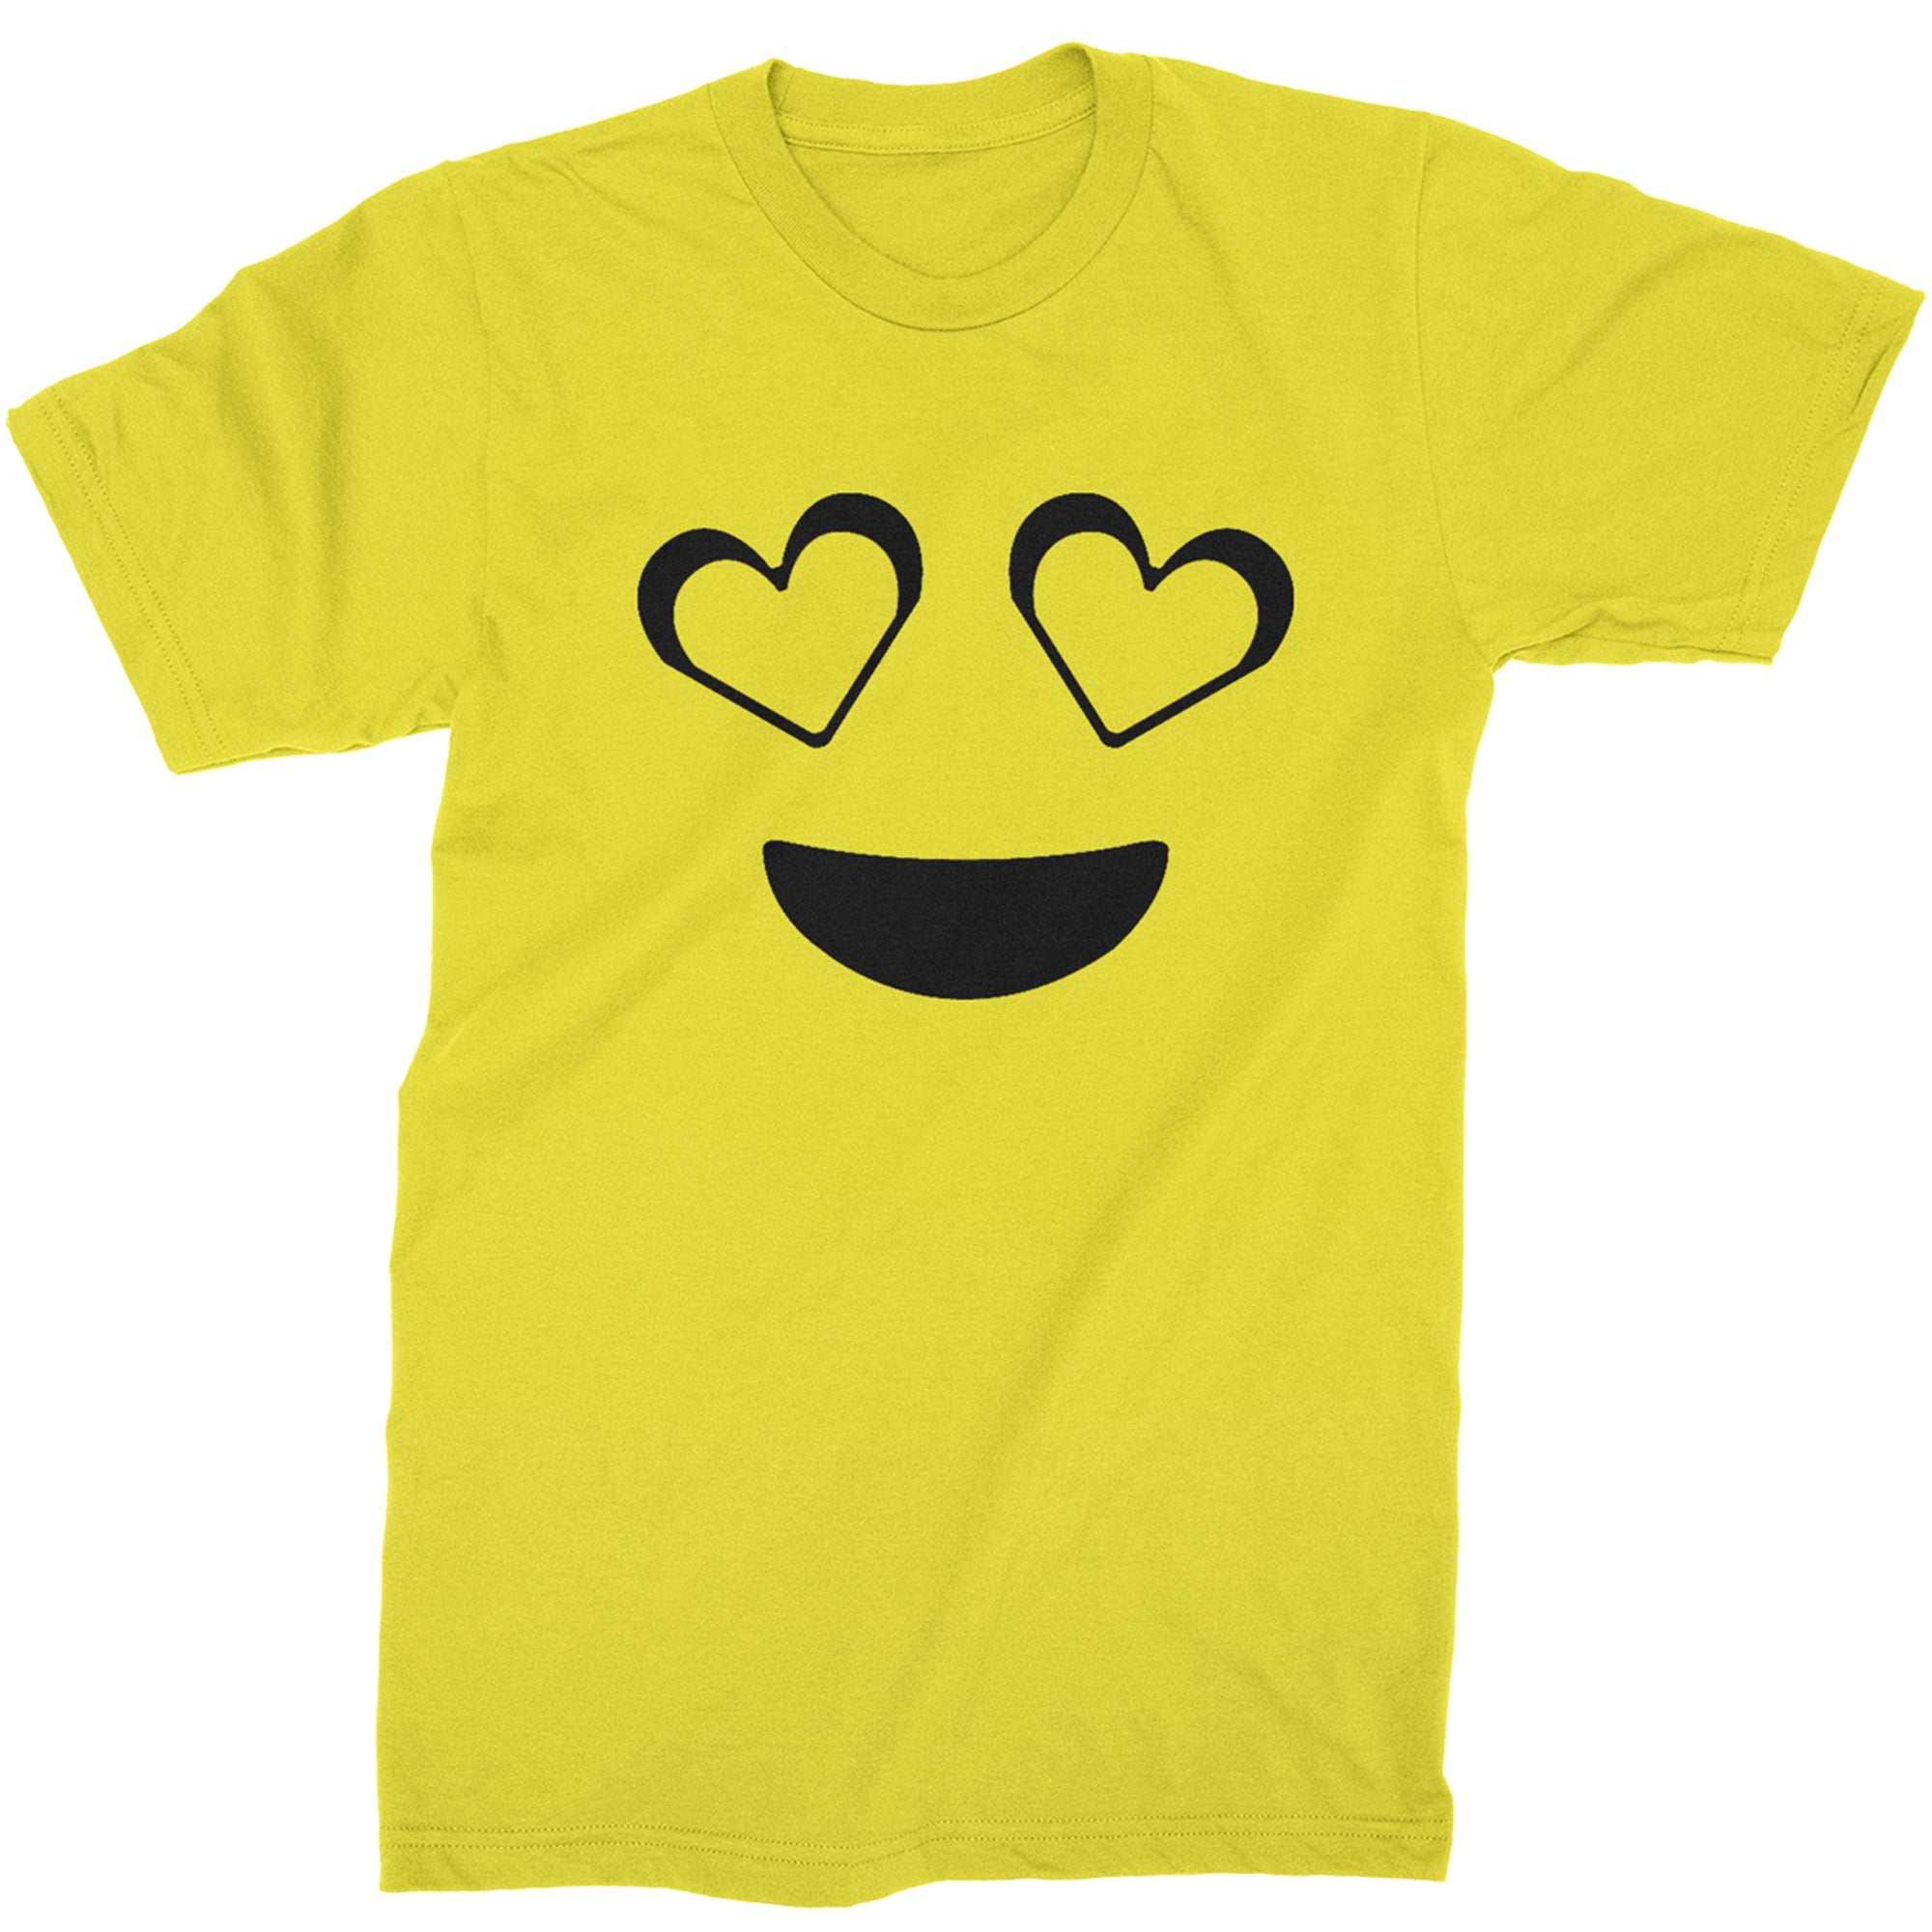 Womens Emoji Smile Face Emoticon T-shirt Collection Halloween Costume #expressiontees, emiley, emoji, emoji clothing, emoji shirt, emoji t-shirt, emoji tee, emoji tshirt, emoji tshirts, emoticon, emoticon shirt, halloween costume by Expression Tees